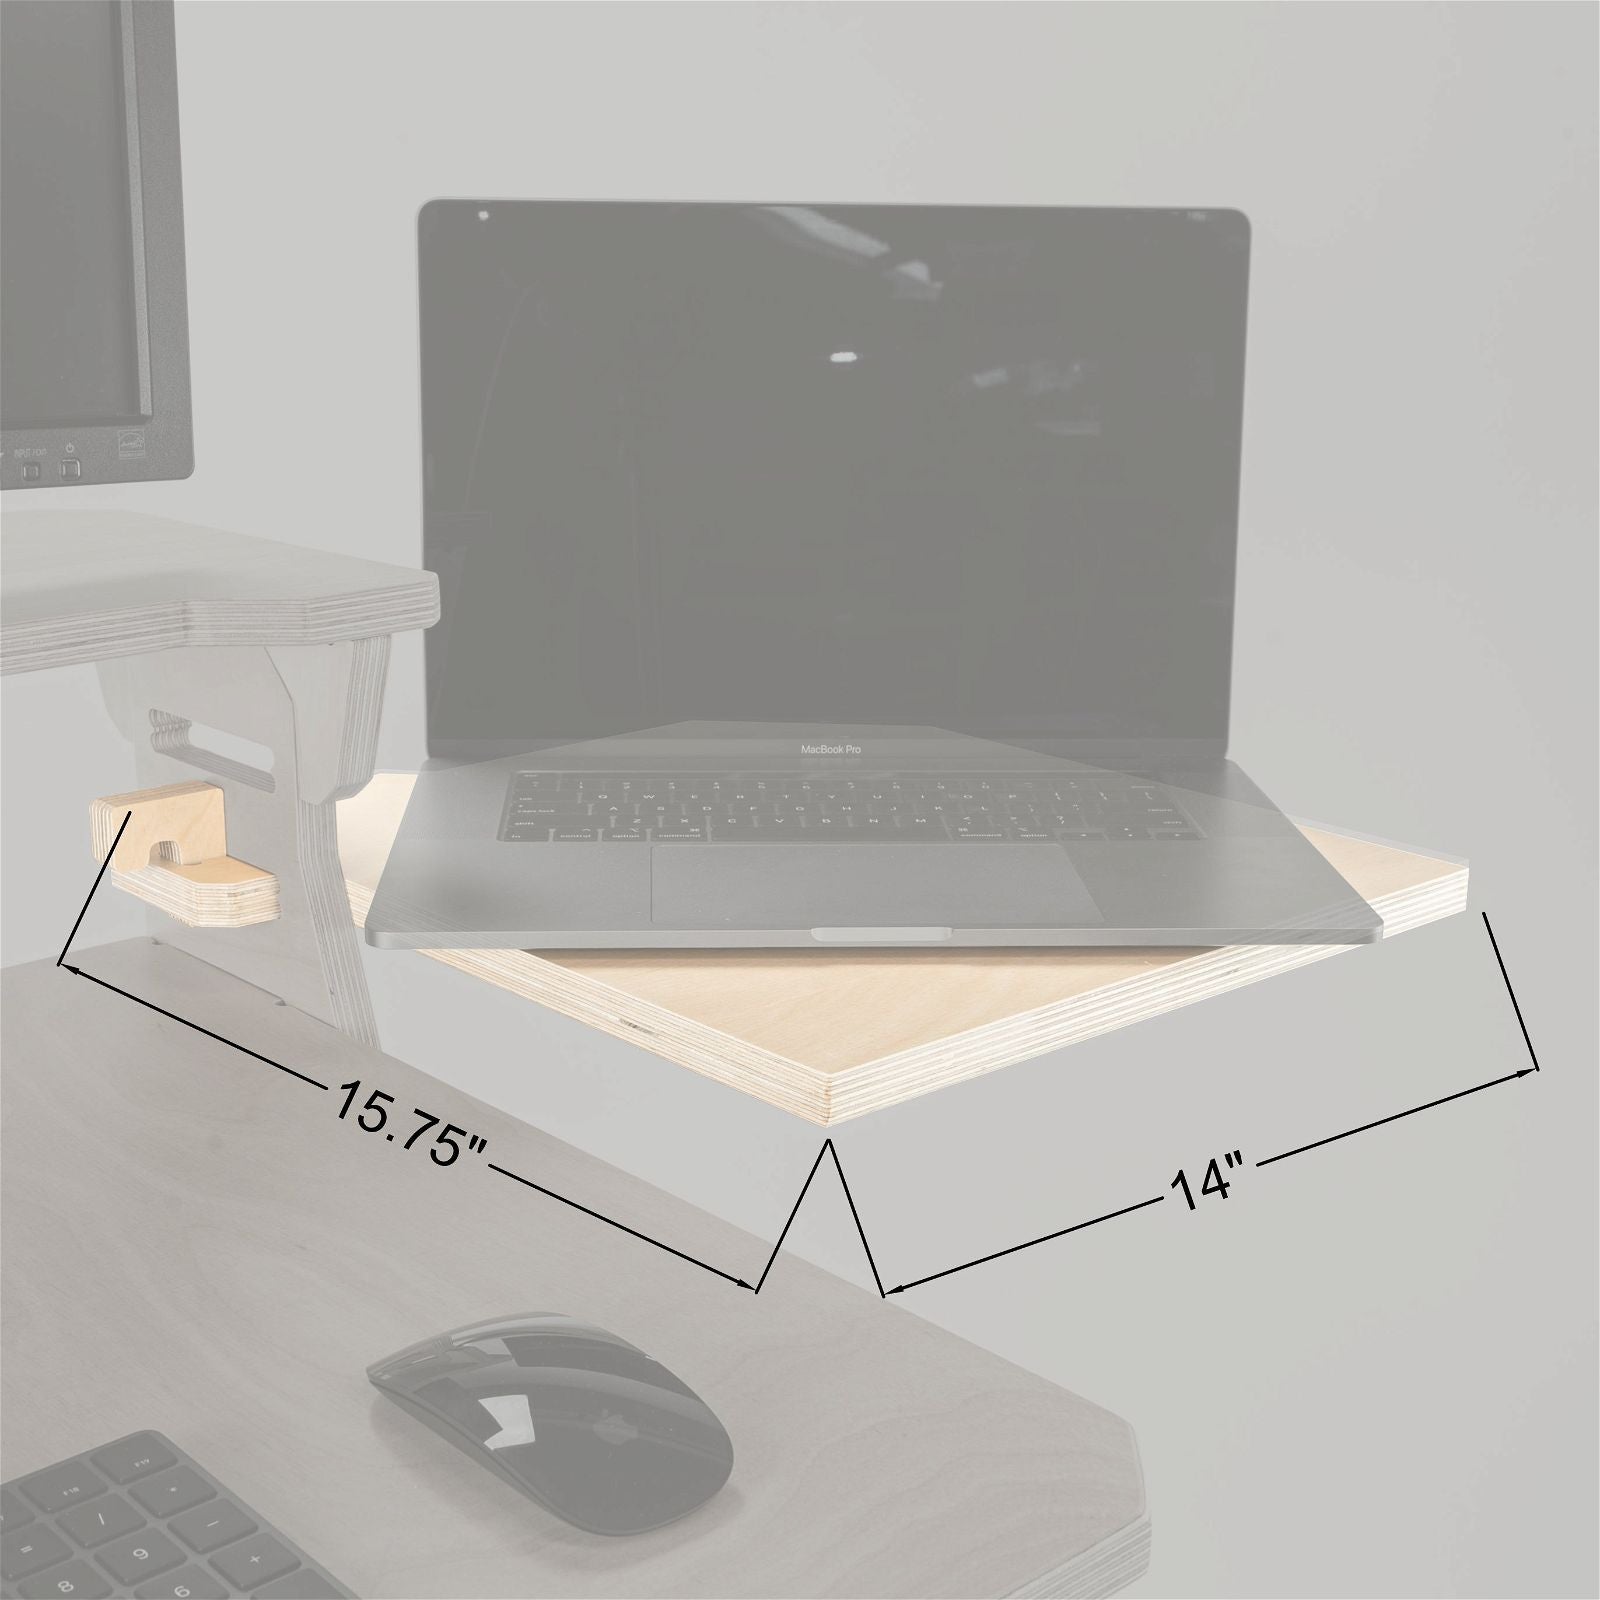 2x Wing Shelves -  - Work From Home Desks                                    